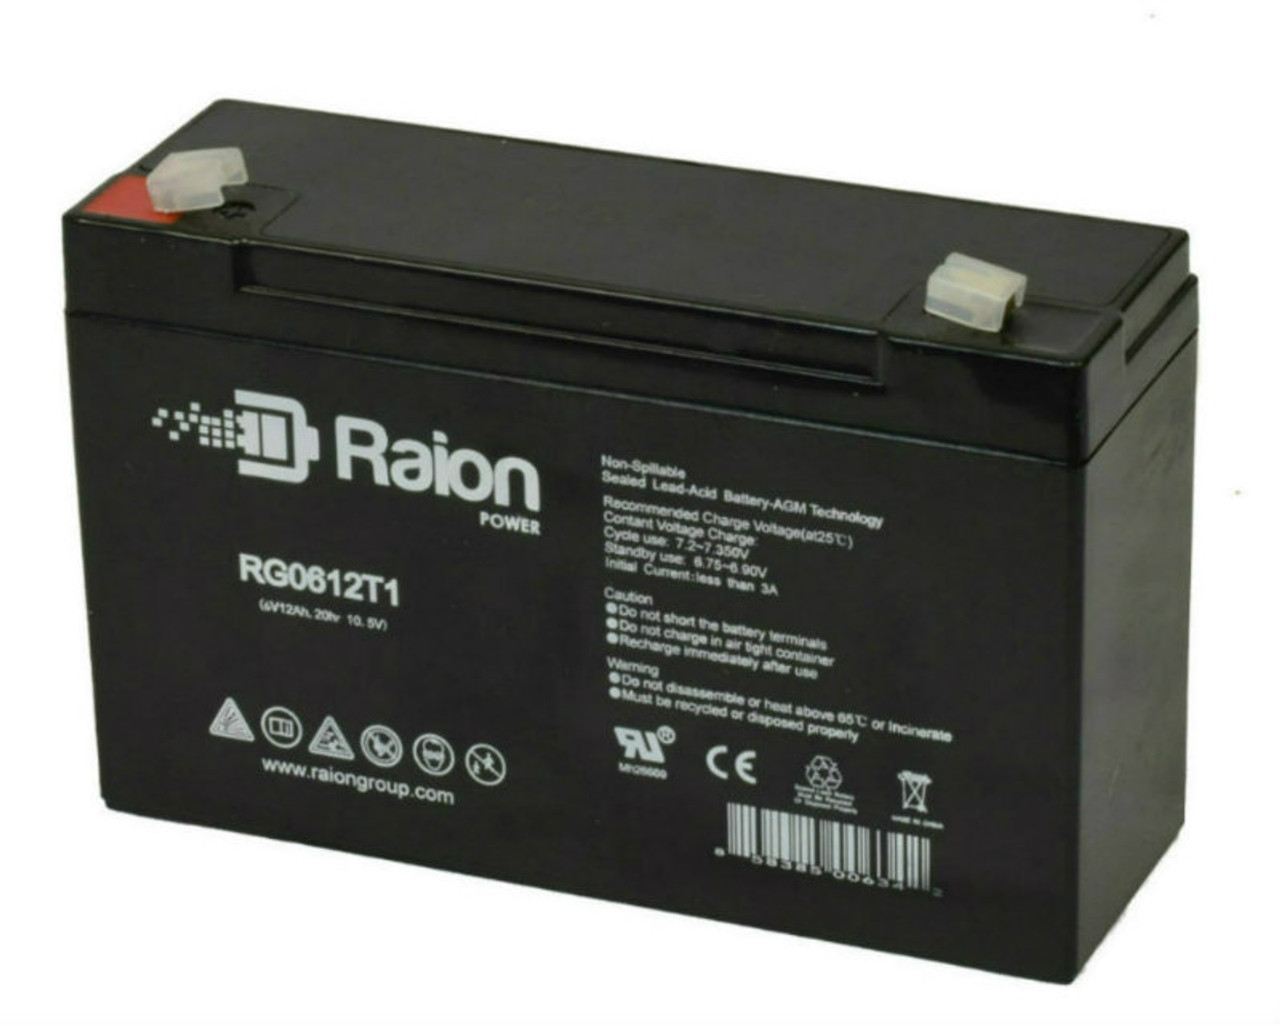 Raion Power RG06120T1 Replacement 6V 12Ah Emergency Light Battery for Carpenter Watchman SS-2